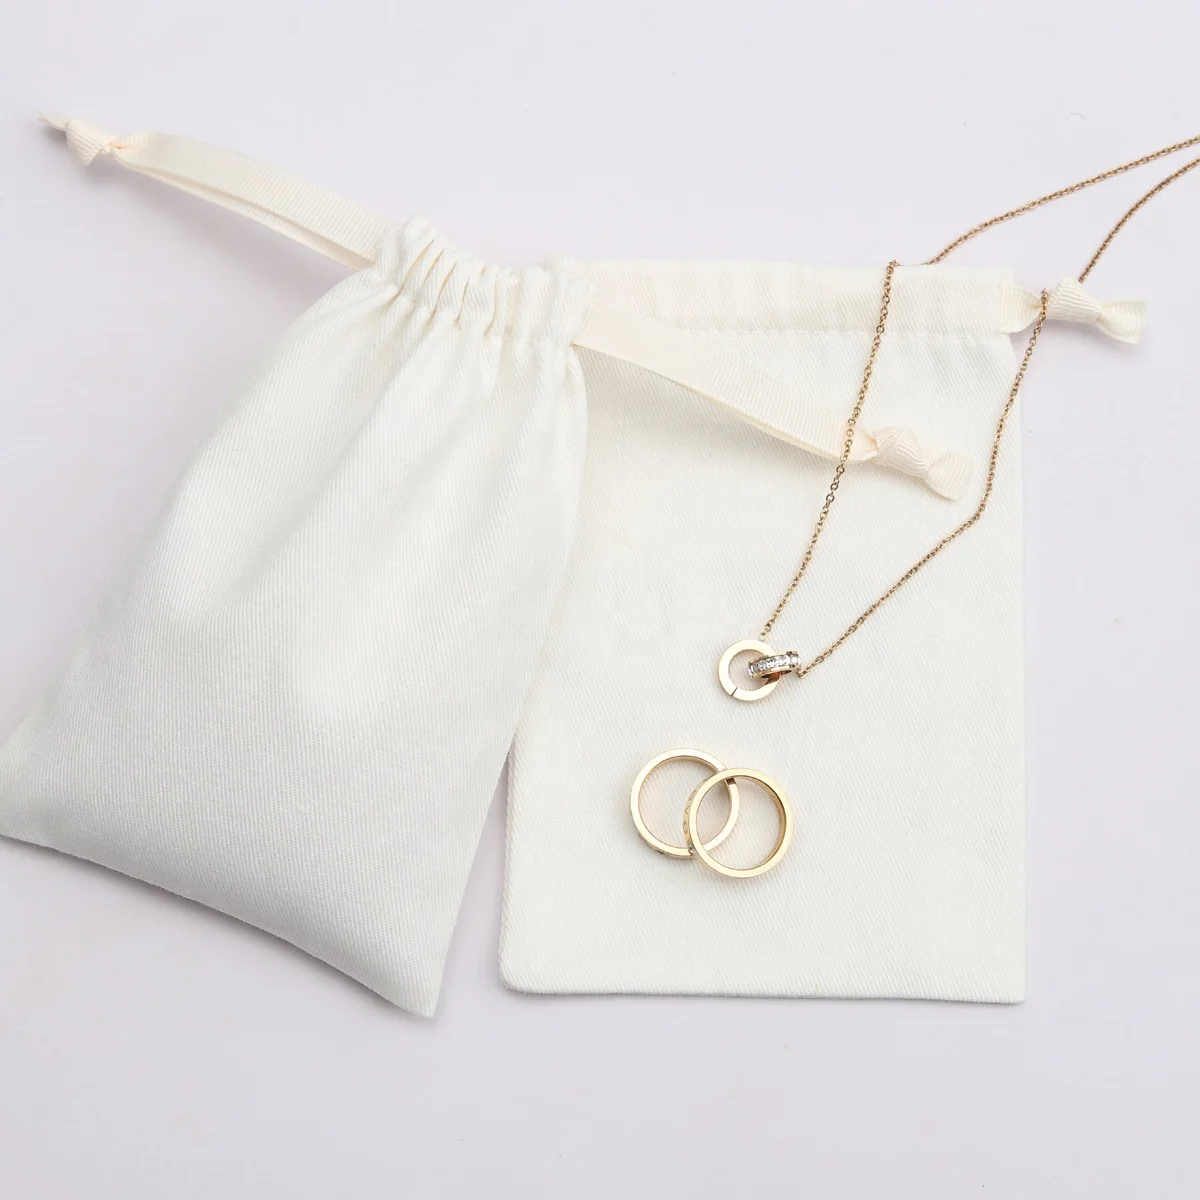 High Quality White Cotto Twill Sachet Soap Bag Eco-Friendly Drawstring Muslin Cotton Dust Pouch